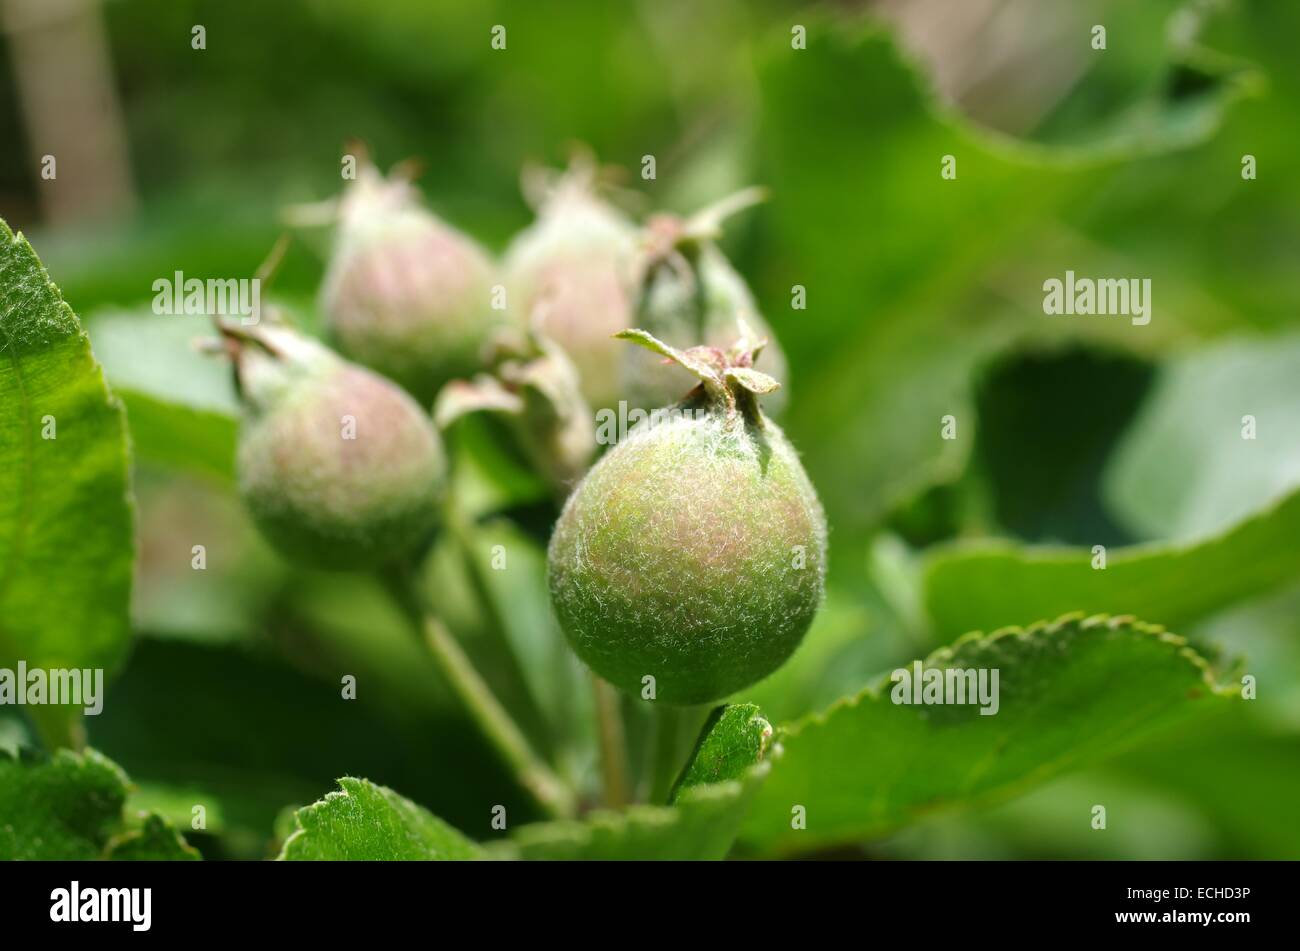 photo of growing apple on branch of tree Stock Photo